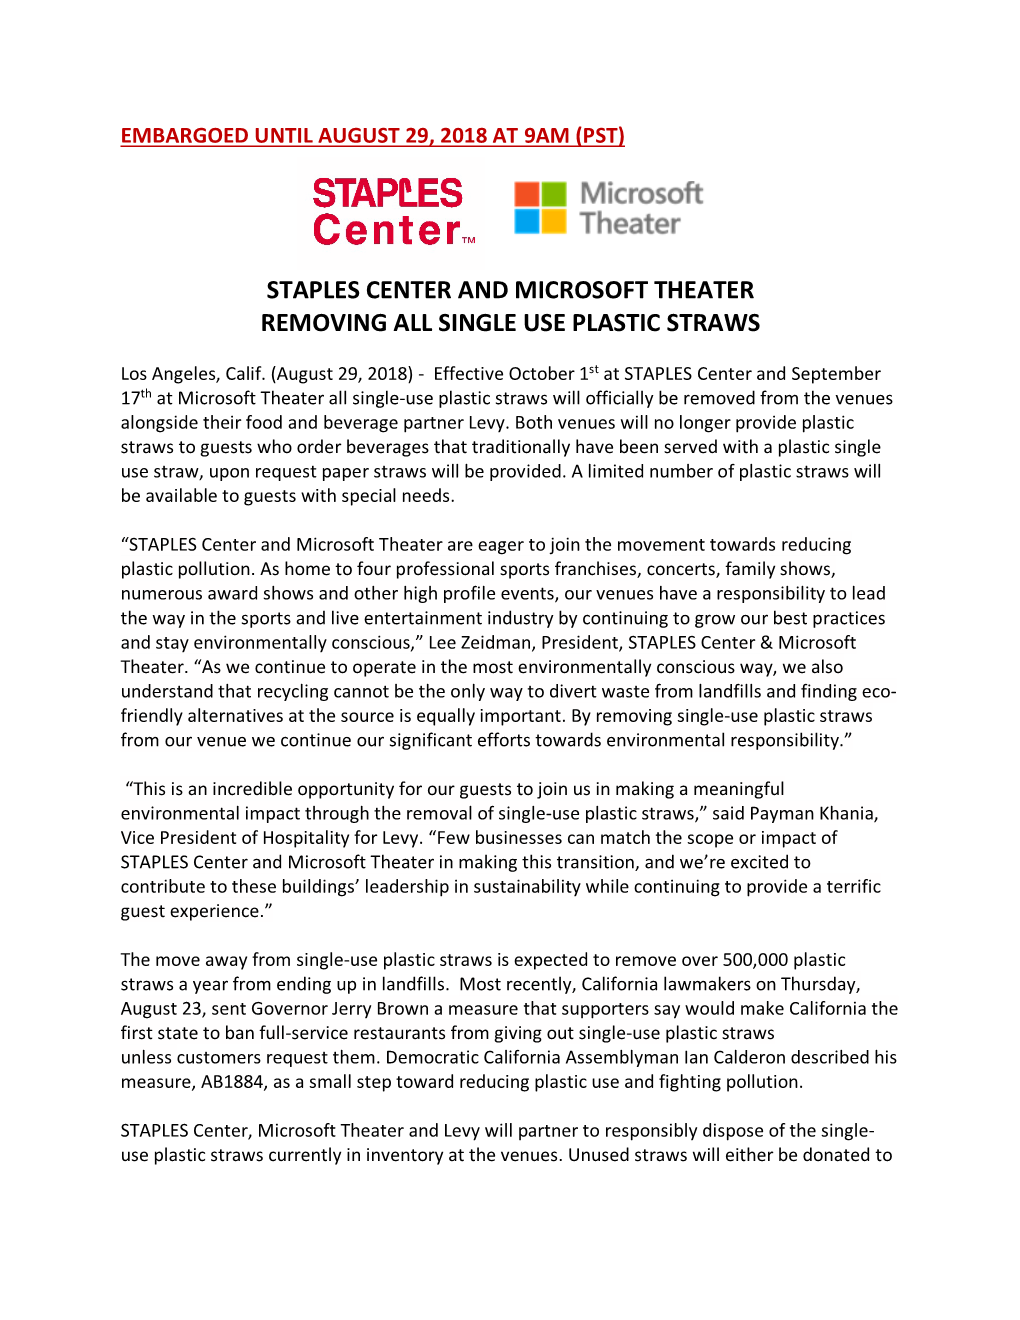 Staples Center and Microsoft Theater Removing All Single Use Plastic Straws